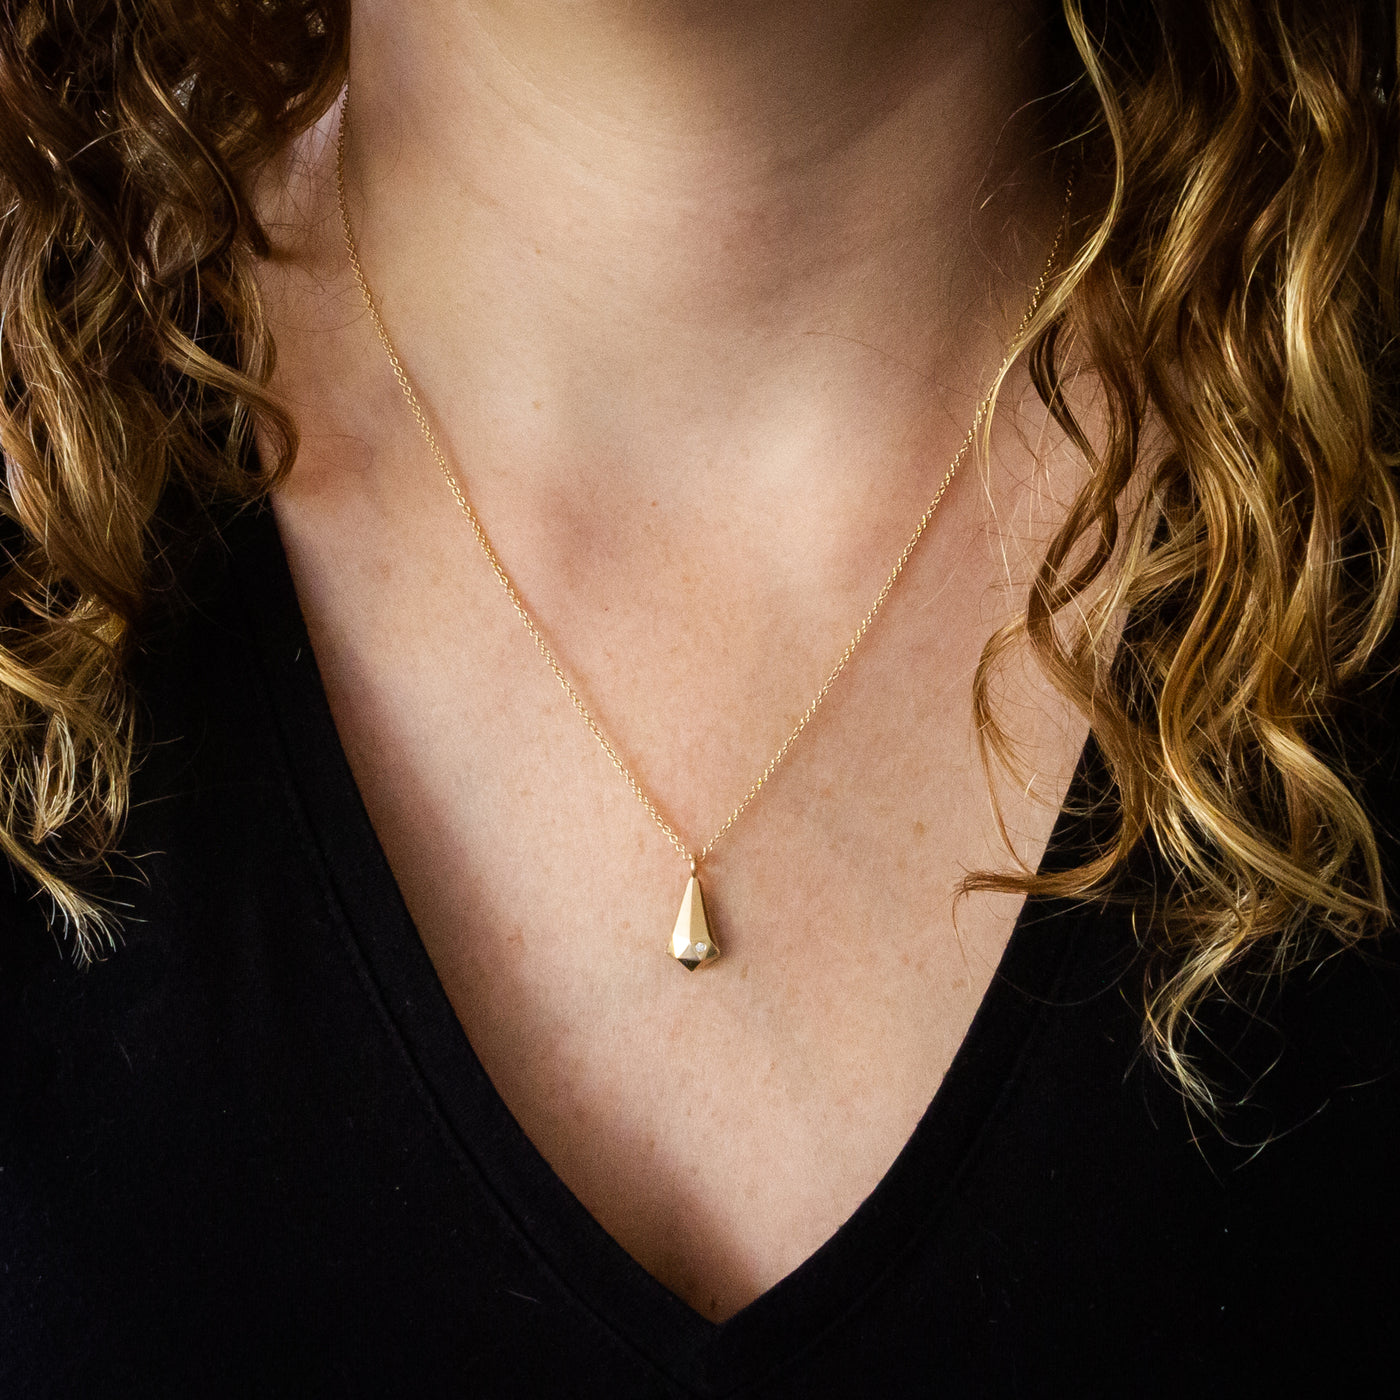 14k yellow gold faceted crystal fragment pendant with a diamond and a gold chain around a neck